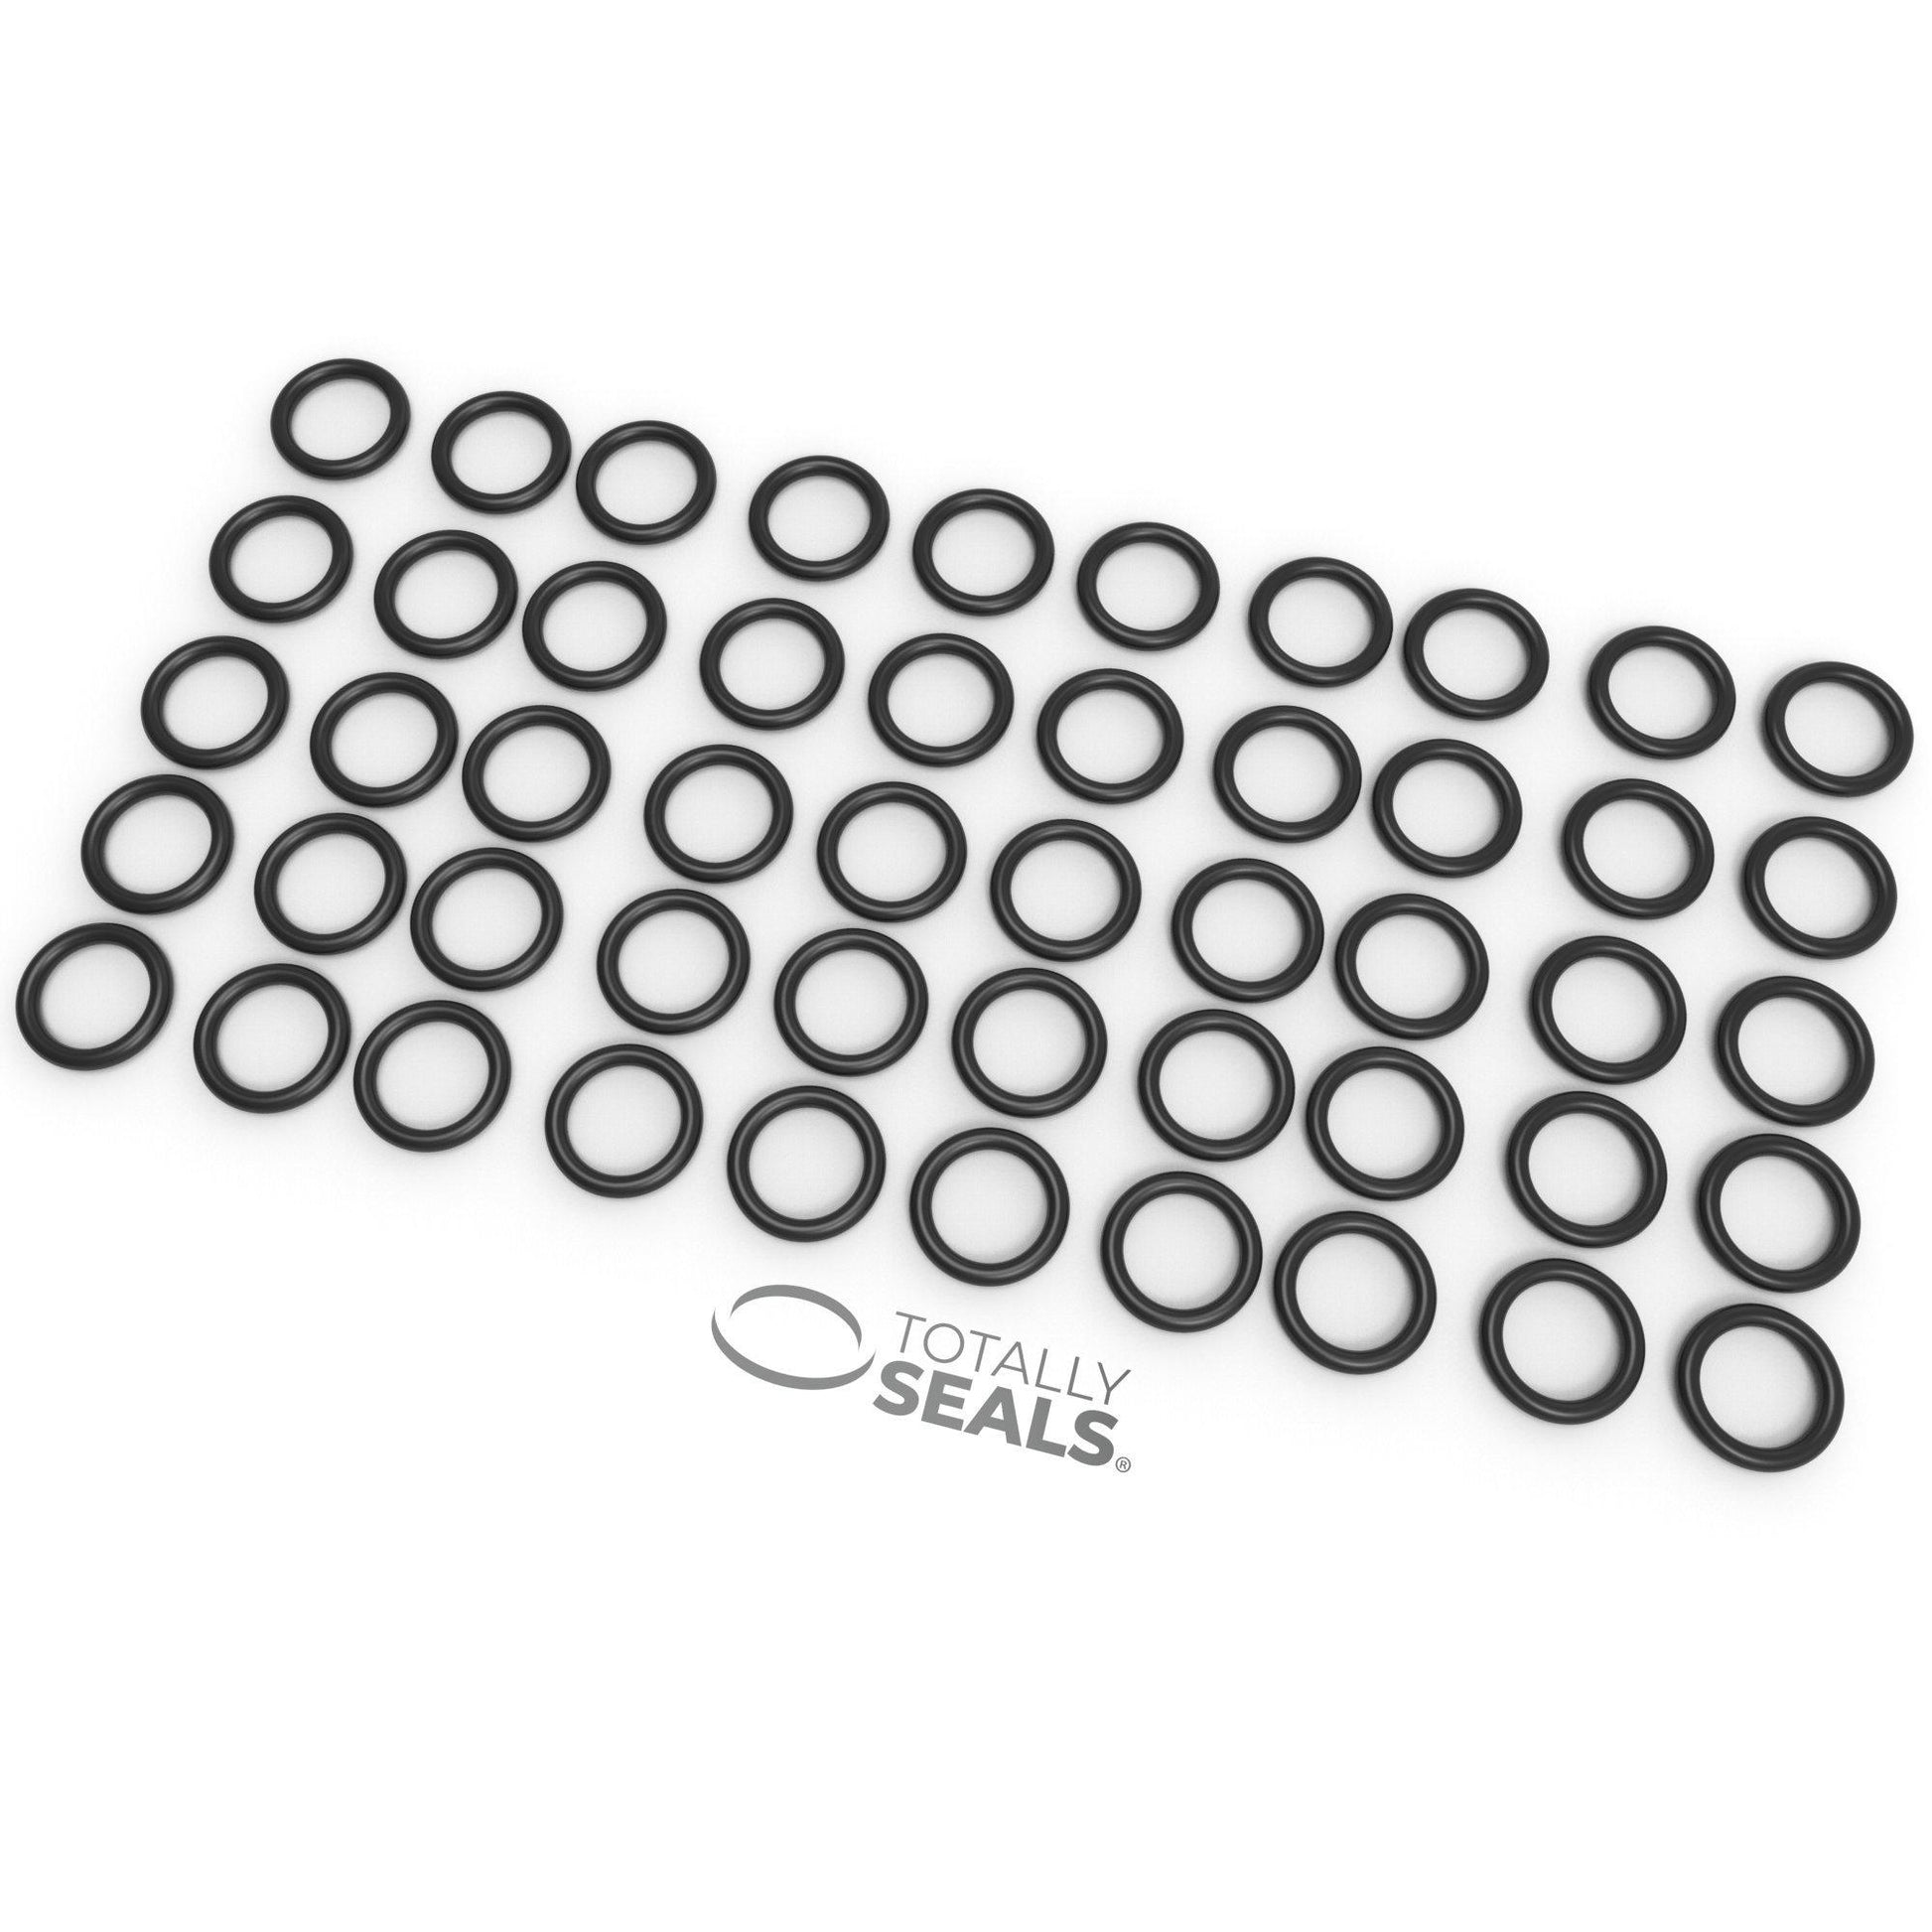 30mm x 1mm (32mm OD) Nitrile O-Rings - Totally Seals®